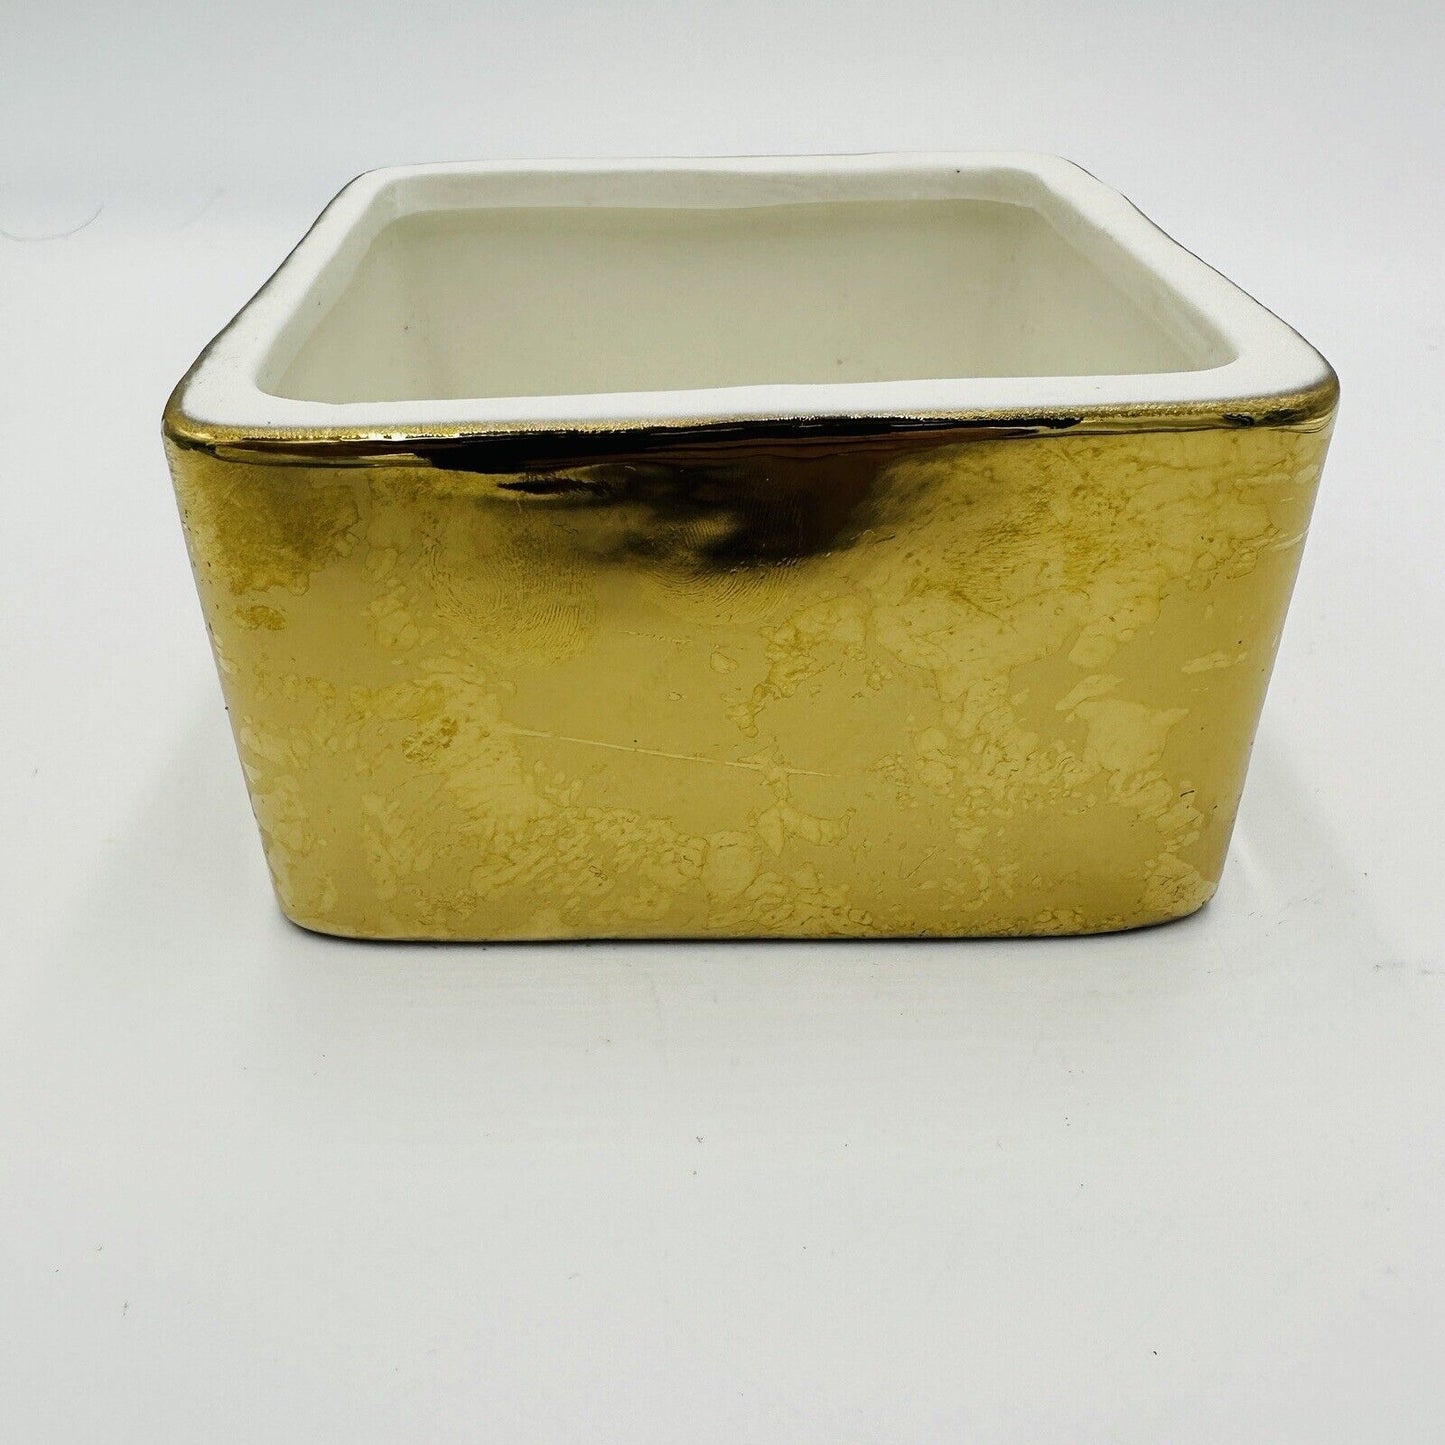 Pottery Barn The Emily and Meritt Gold Ceramic Box Replacement Missing lid